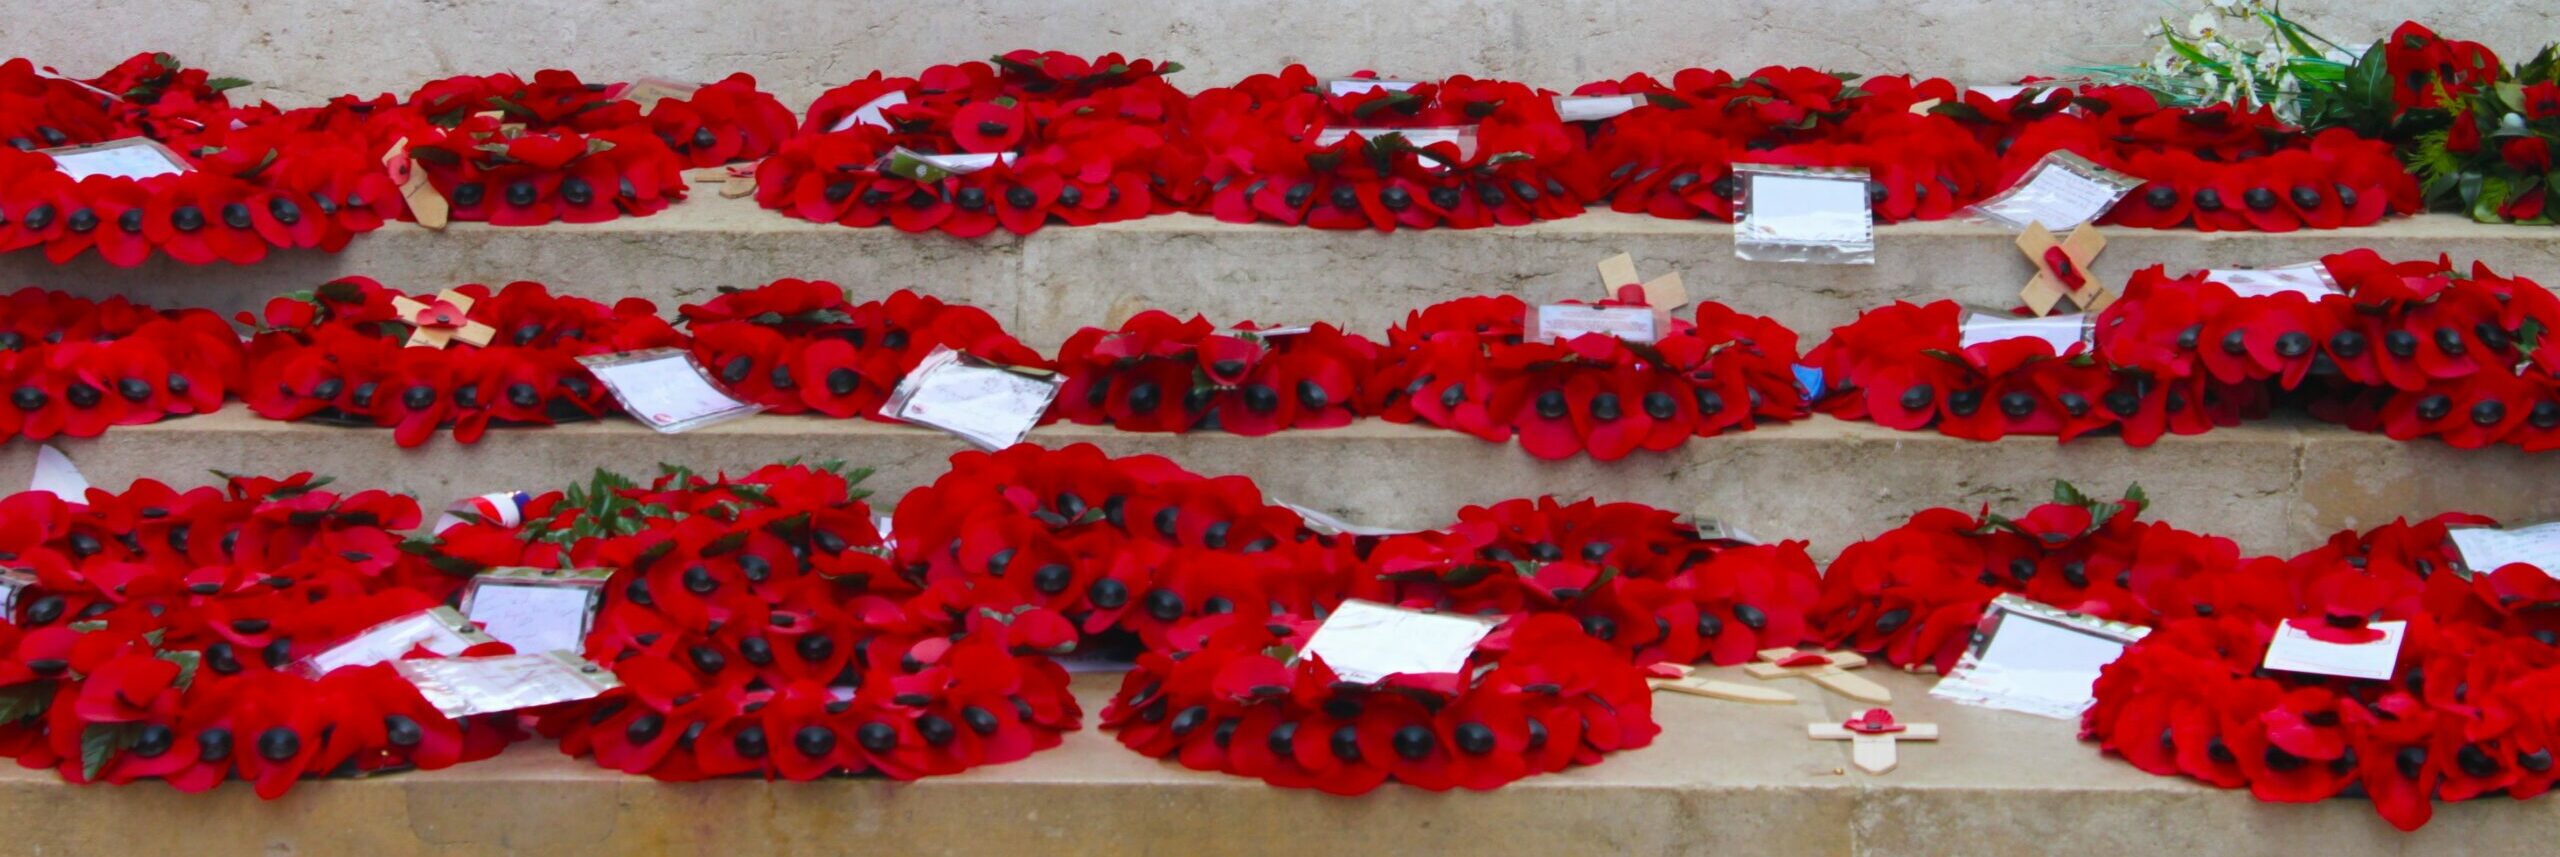 Remembrance Day wreaths